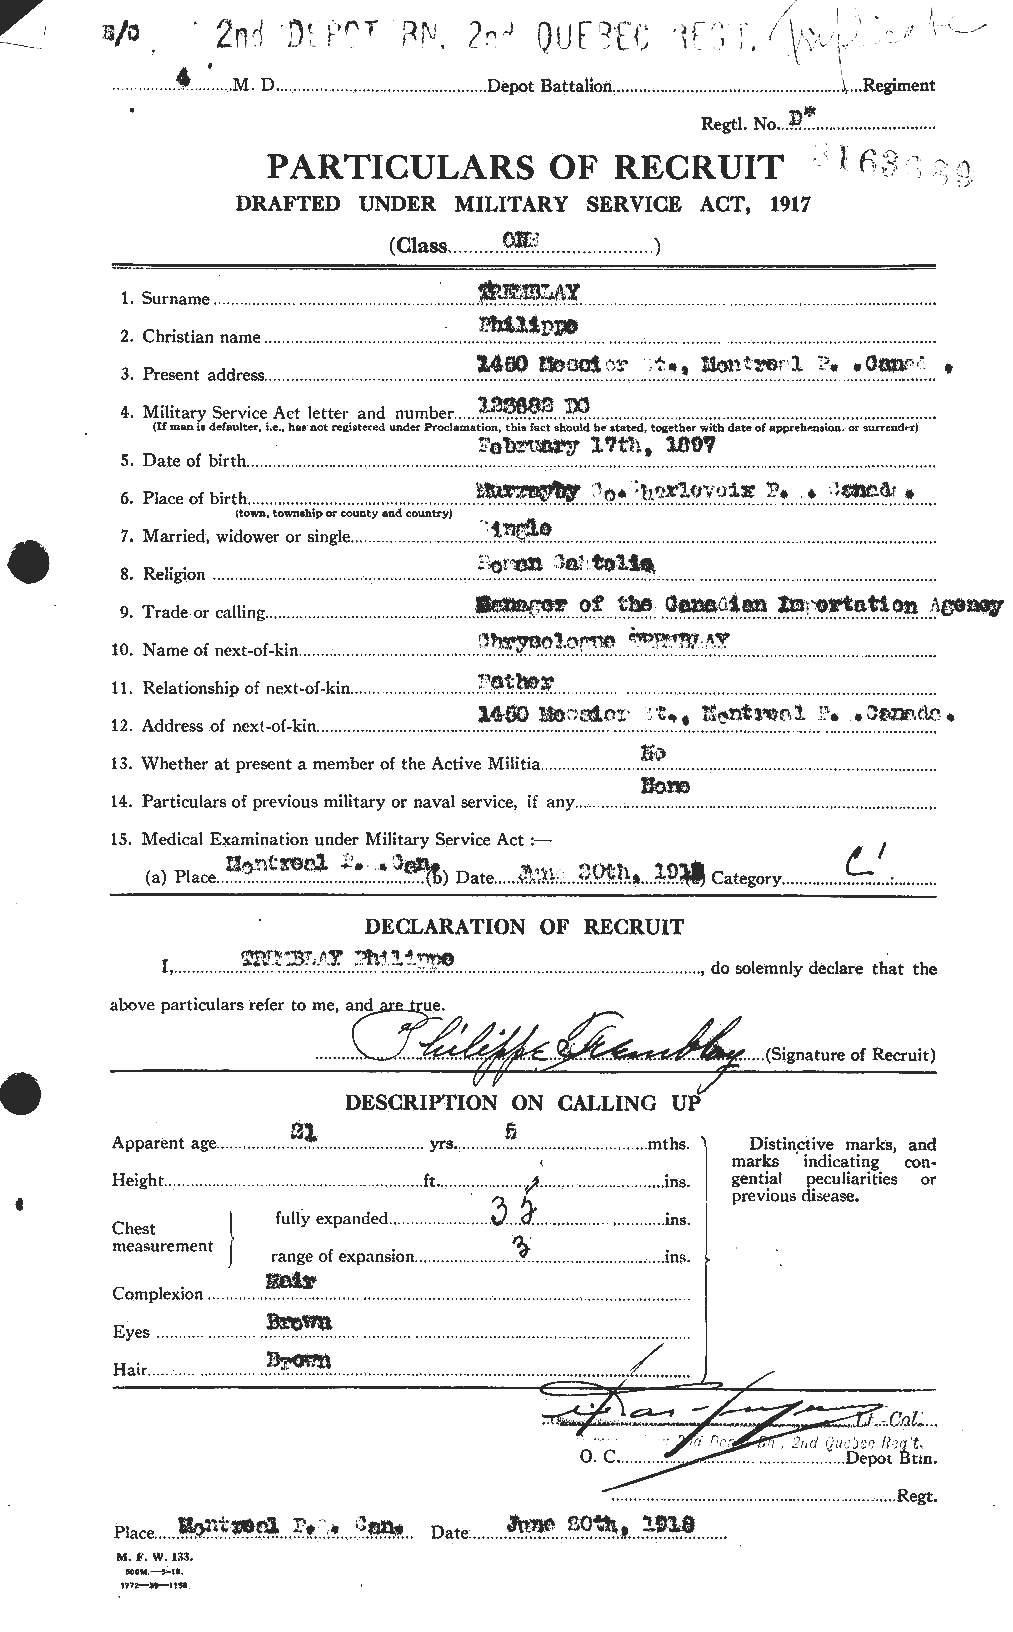 Personnel Records of the First World War - CEF 639236a